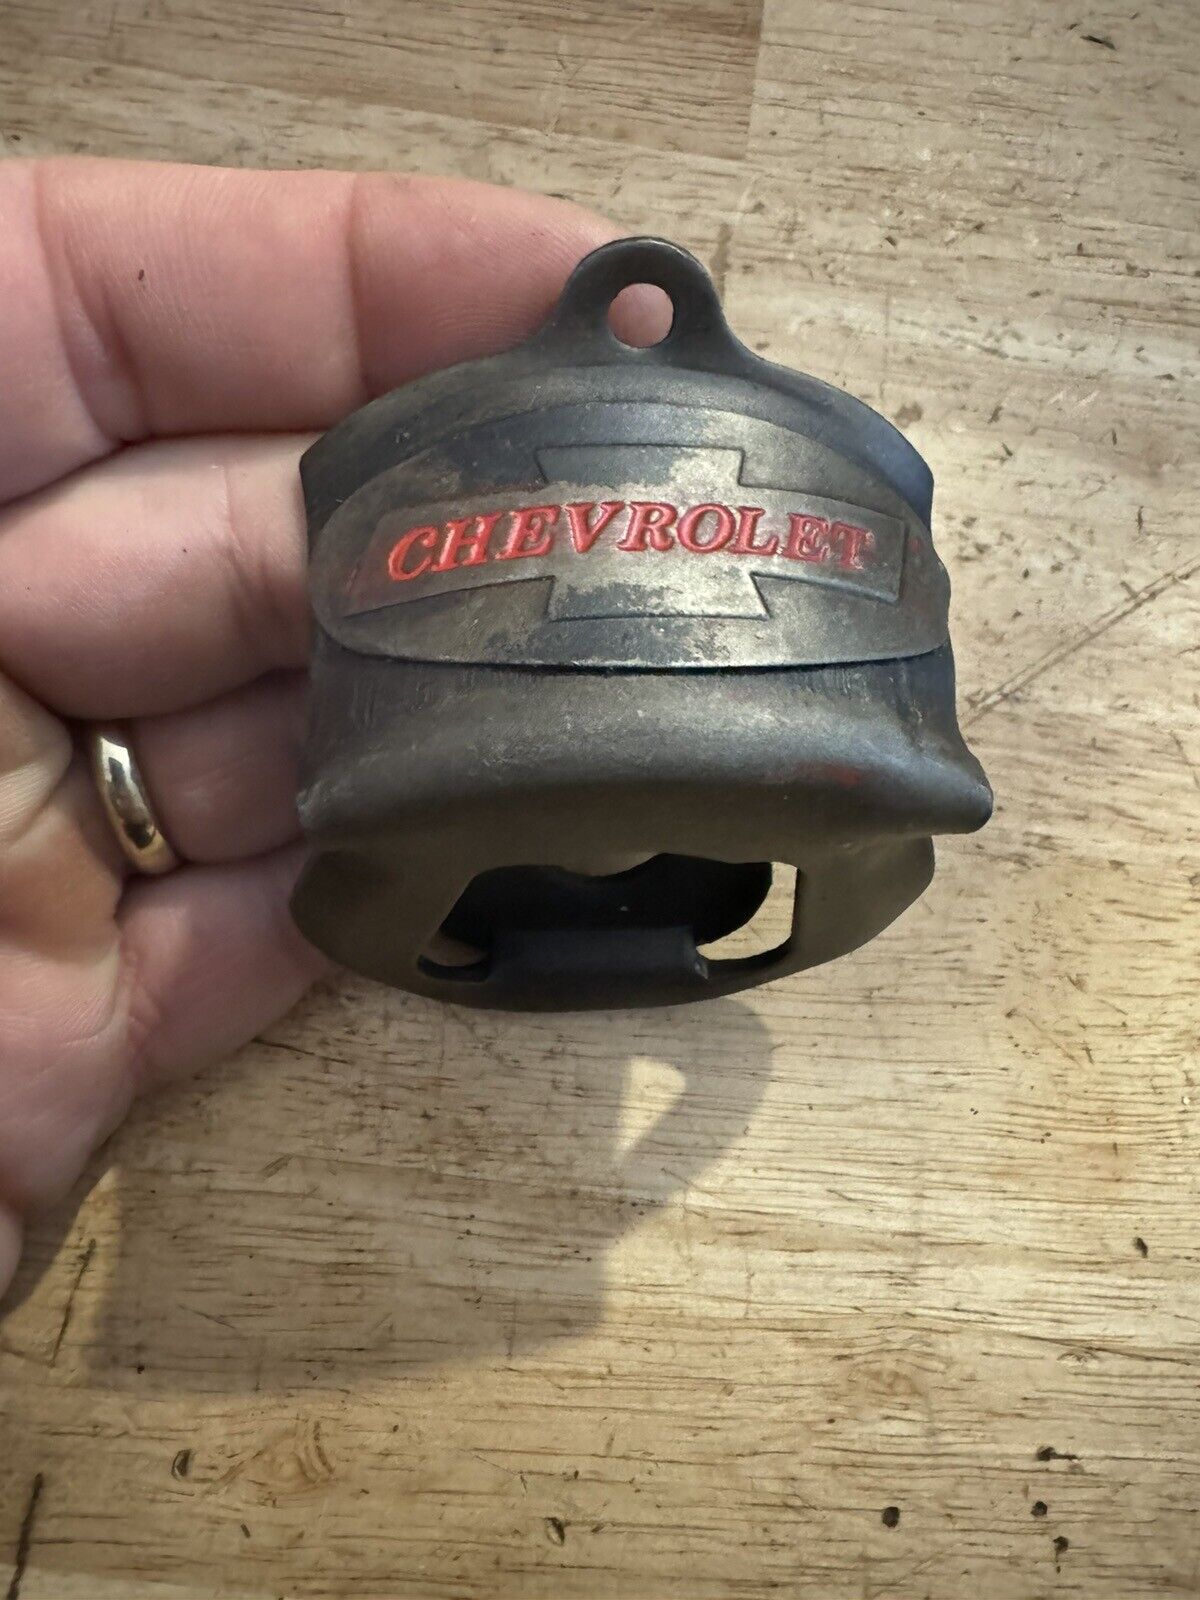 Chevrolet Bottle Opener CHEVY Truck Patina Auto Car Camaro Collector Metal GIFT